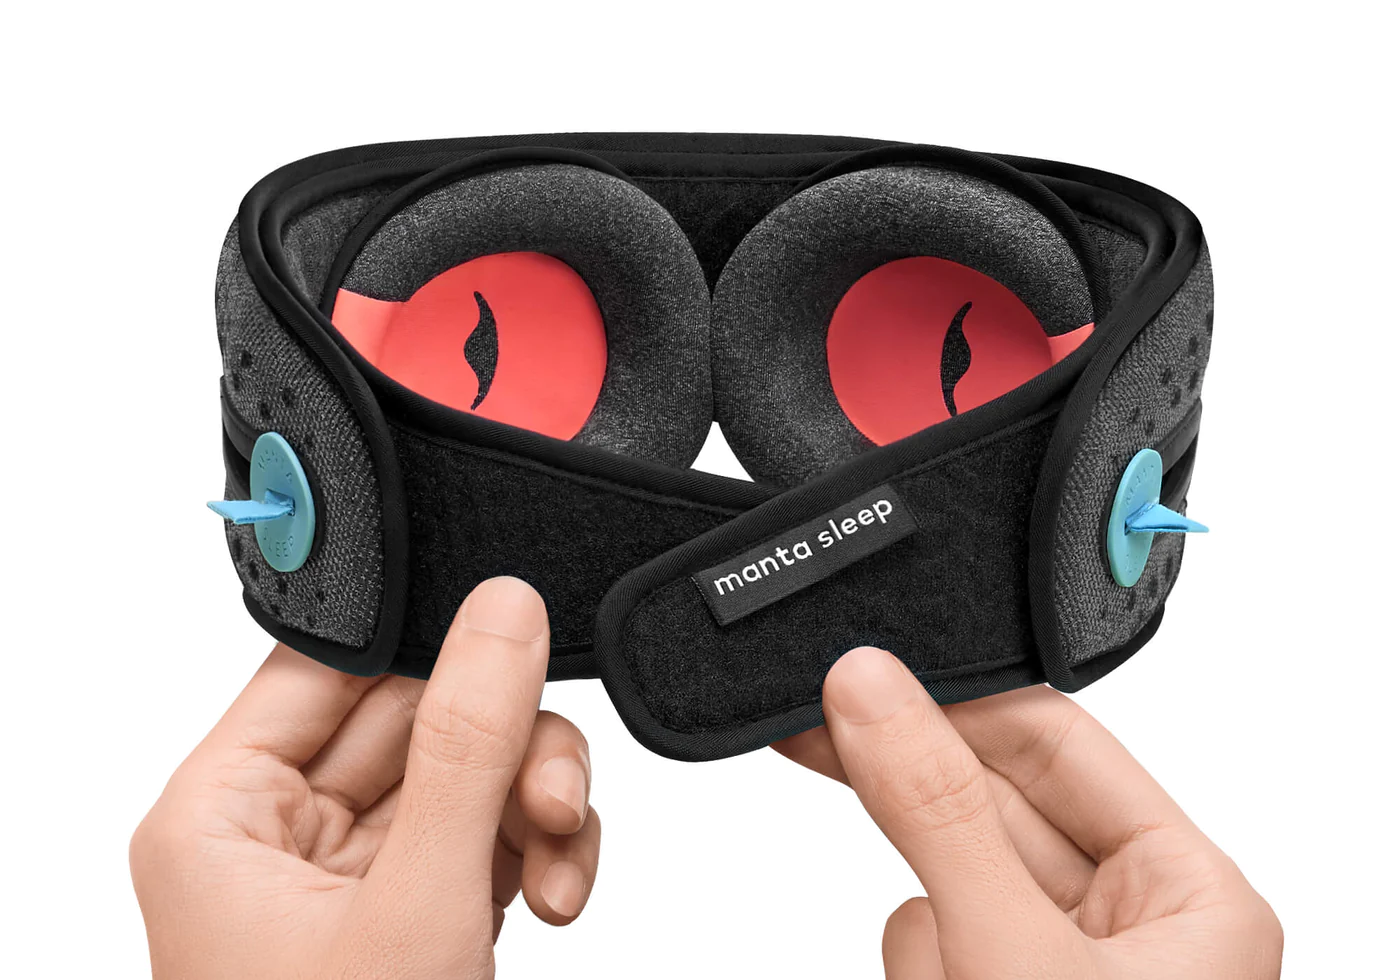 Hands holding the micro hook and loop closure of a black Bluetooth sleep mask with headphones and eye cups for napping.